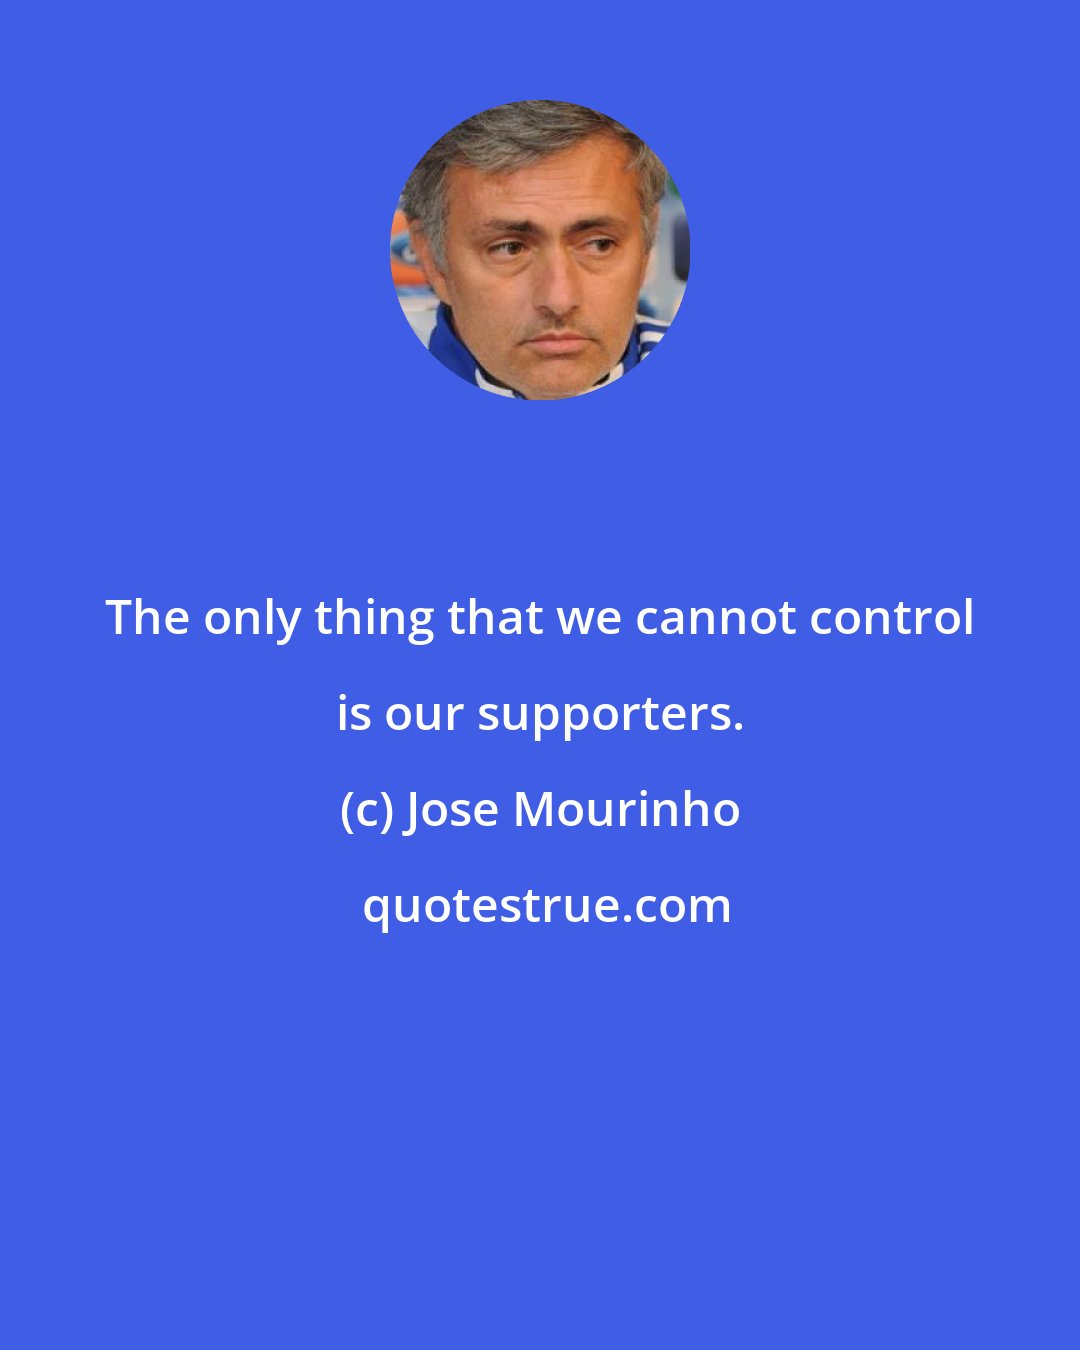 Jose Mourinho: The only thing that we cannot control is our supporters.